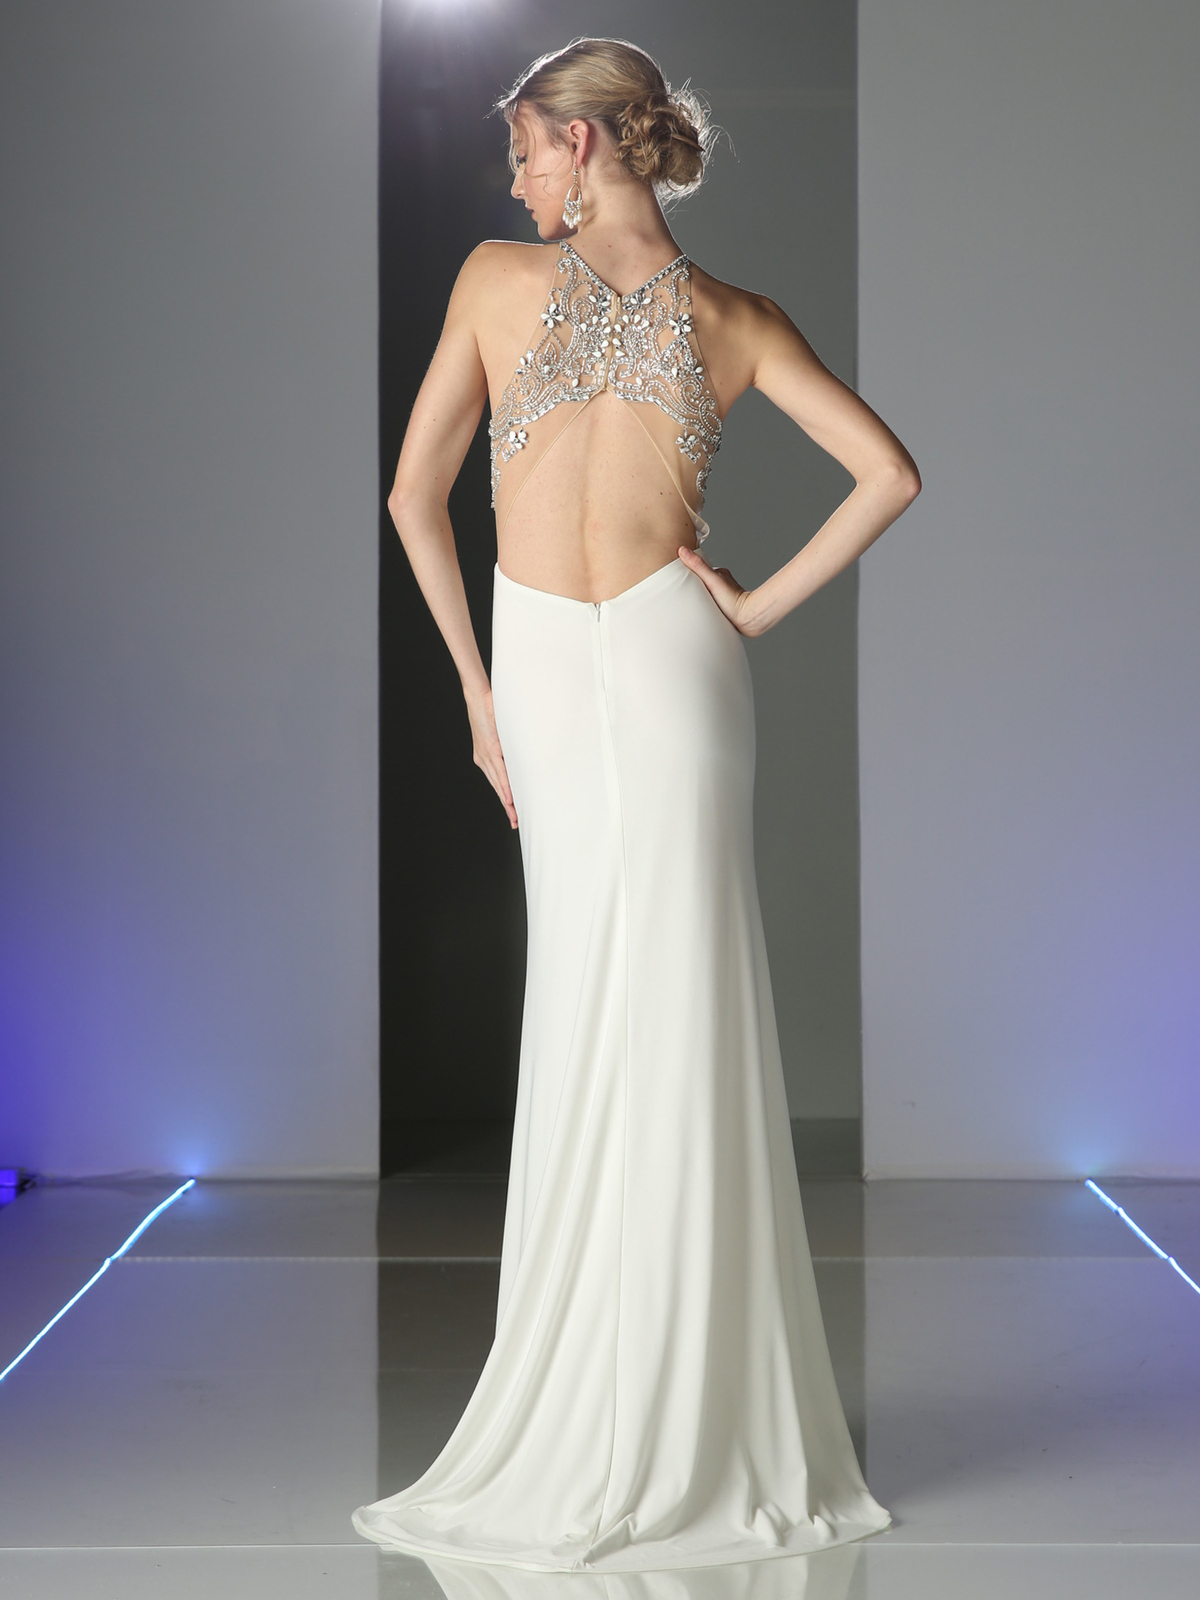 Jeweled Strap Halter Top Evening Dress | Sung Boutique L.A.